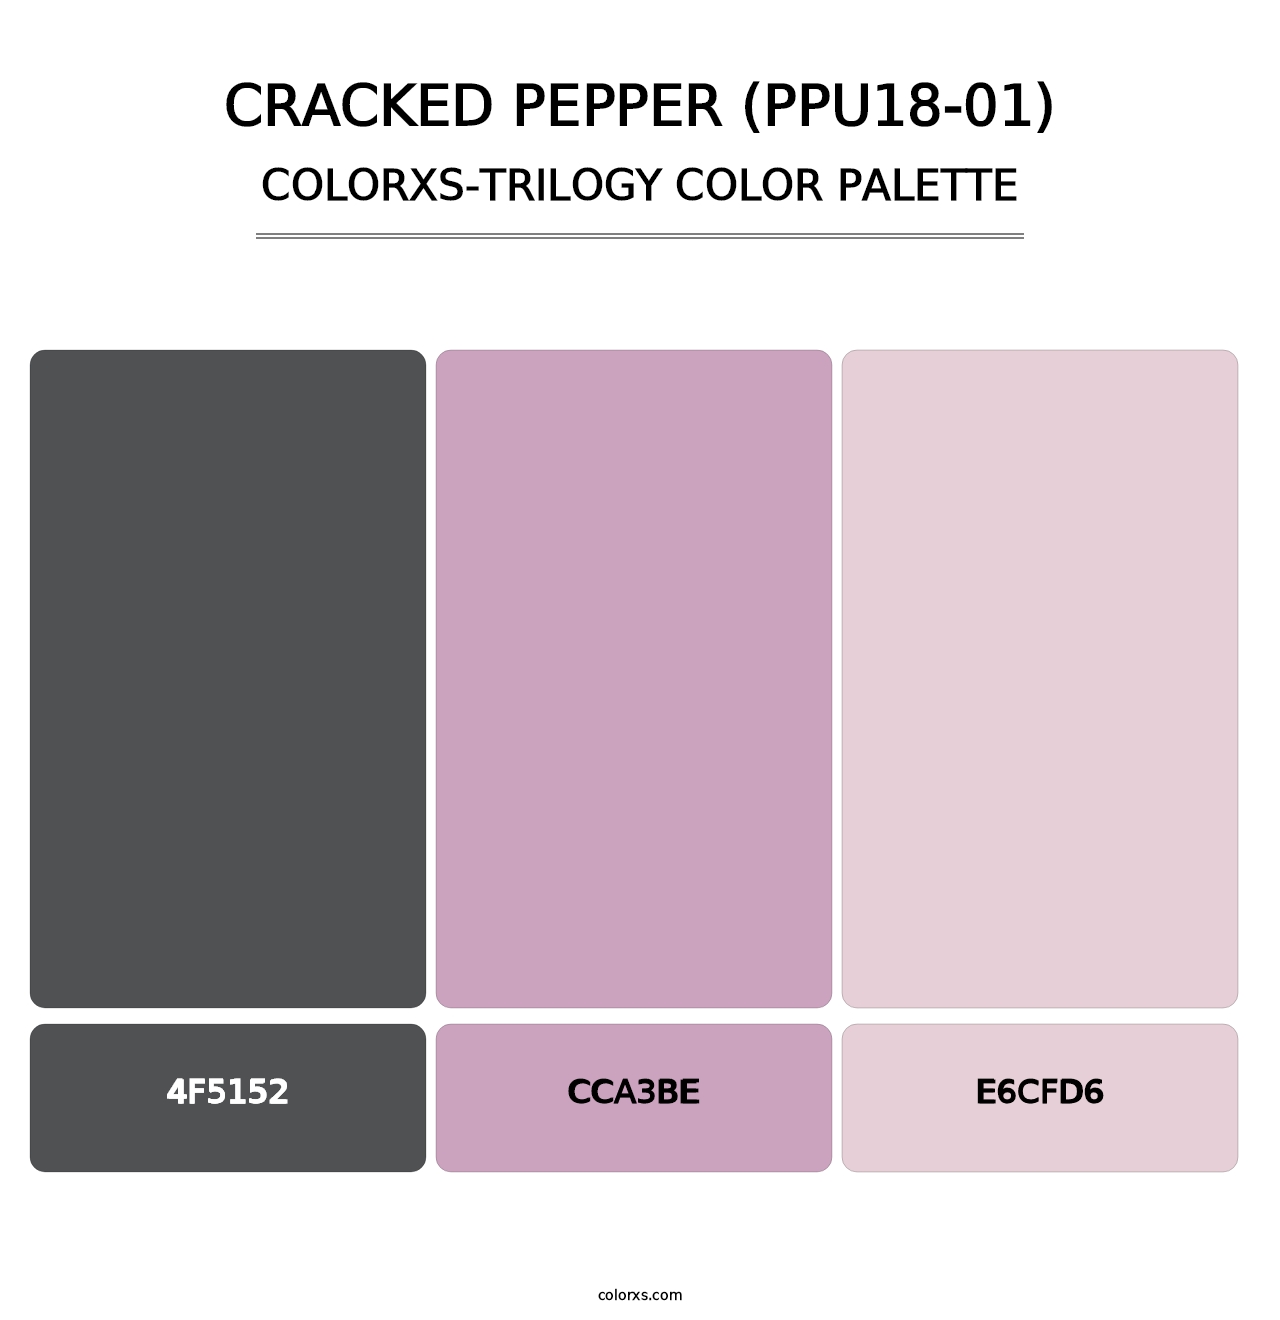 Cracked Pepper (PPU18-01) - Colorxs Trilogy Palette